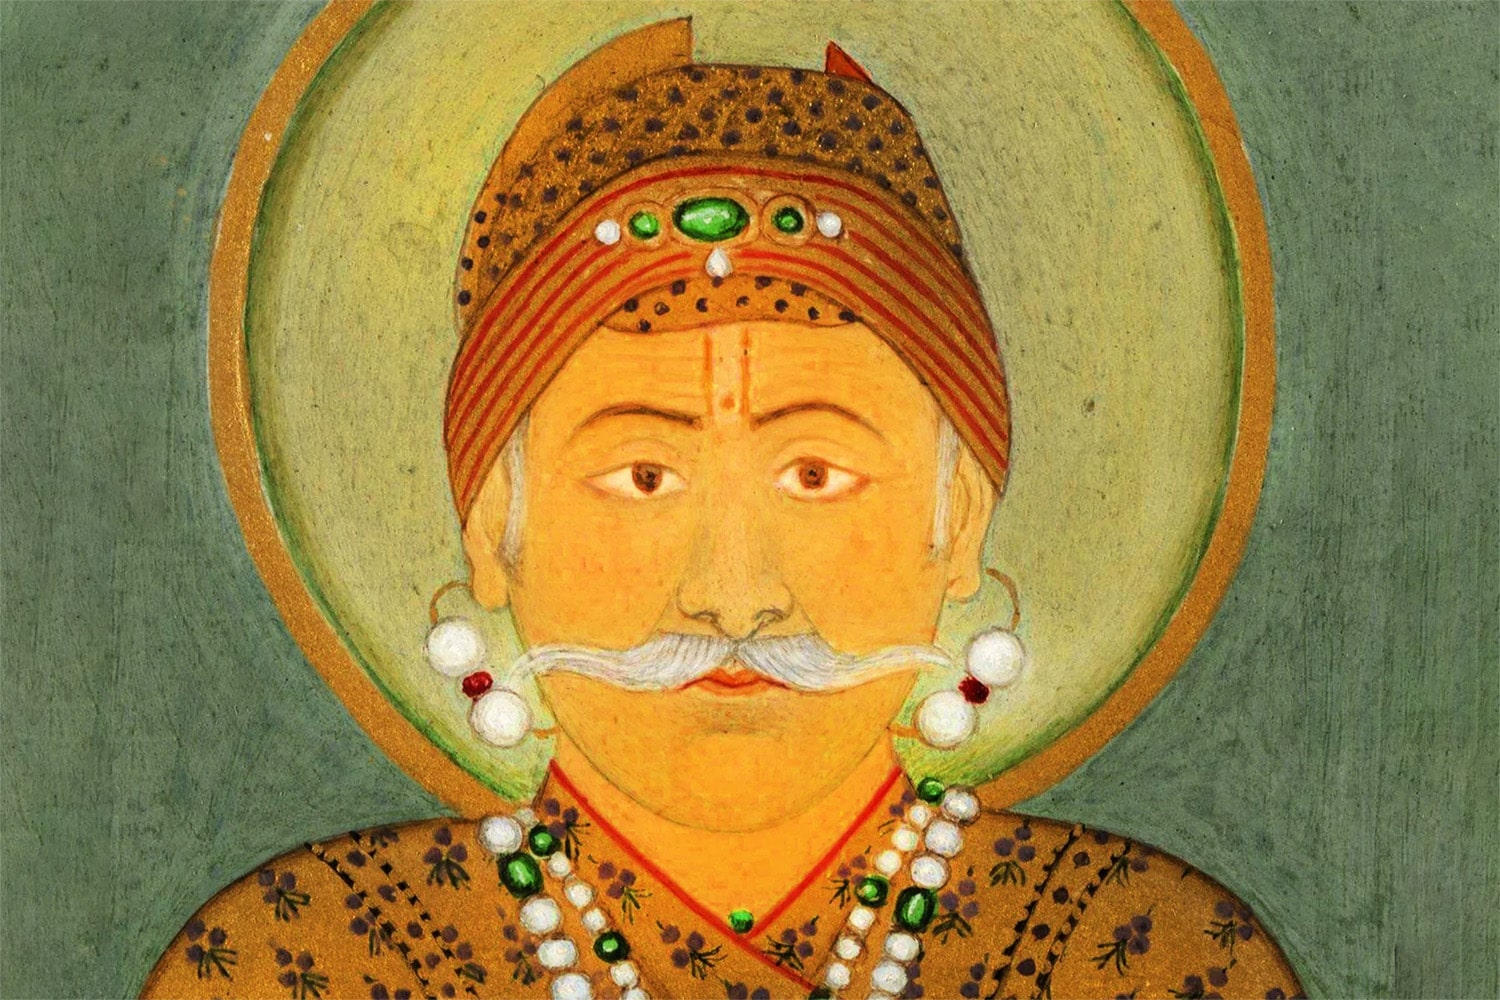 24 interesting facts about Akbar the Great